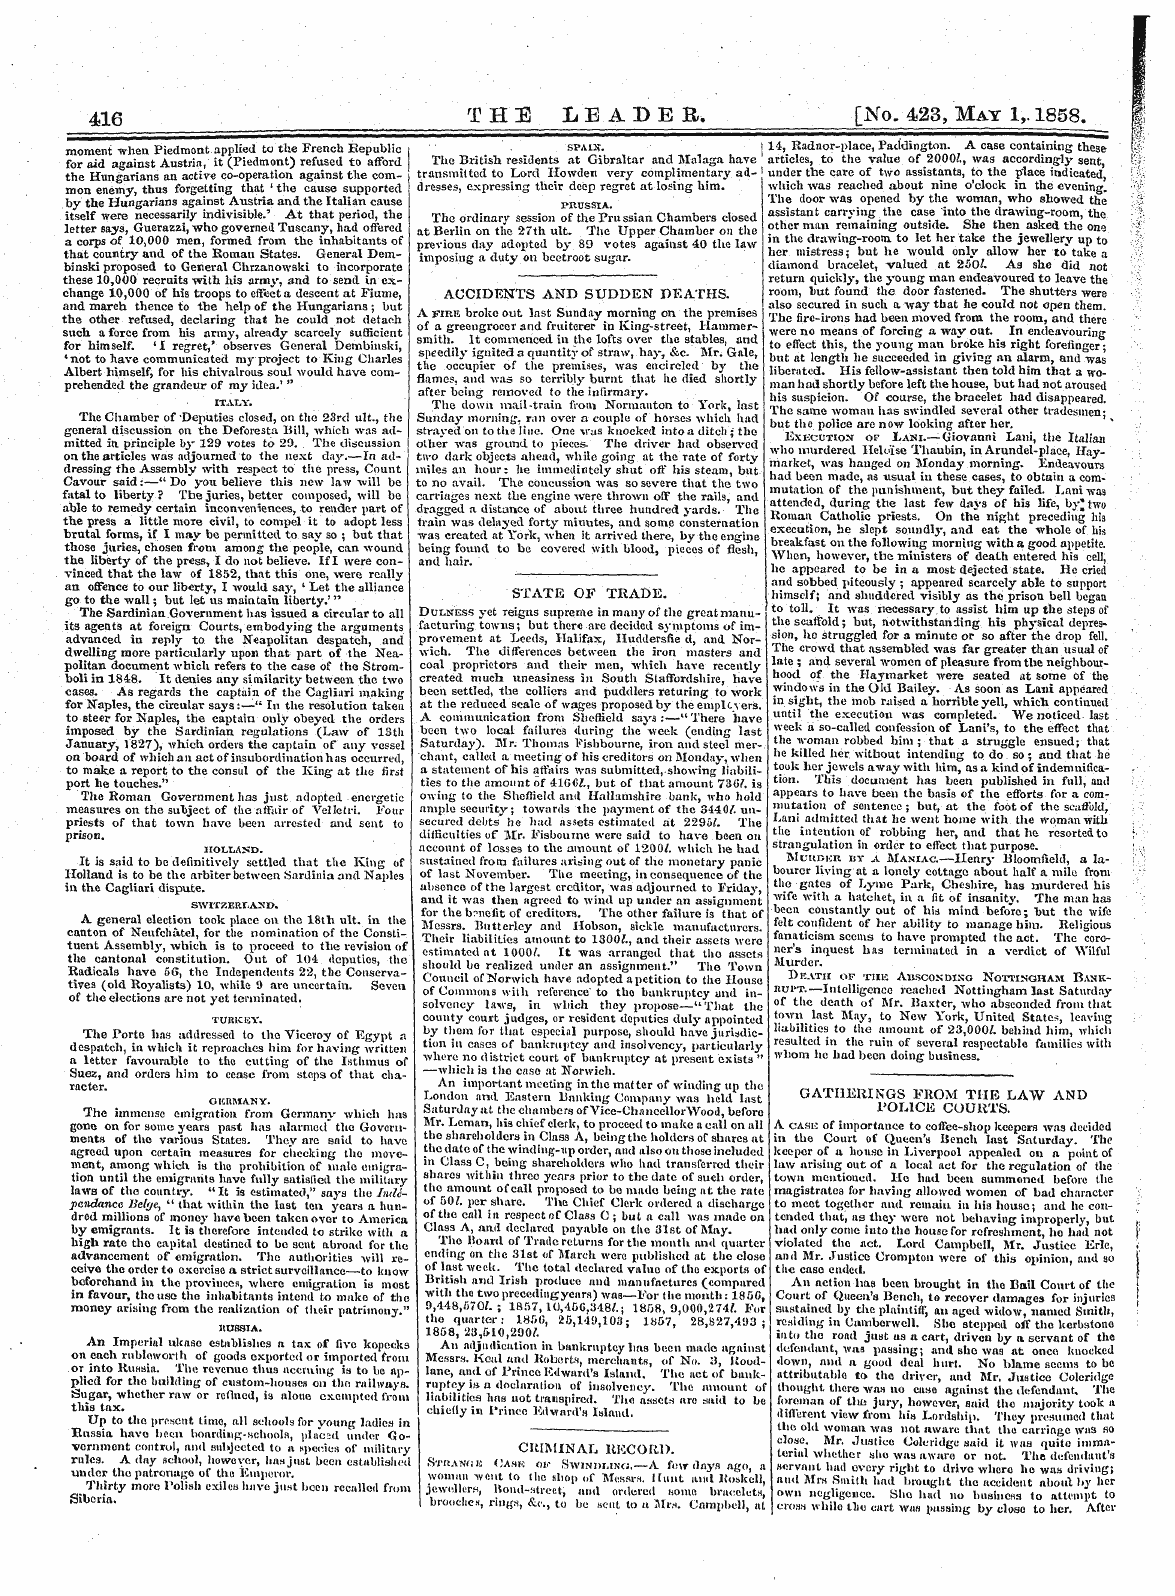 Leader (1850-1860): jS F Y, 1st edition: 8